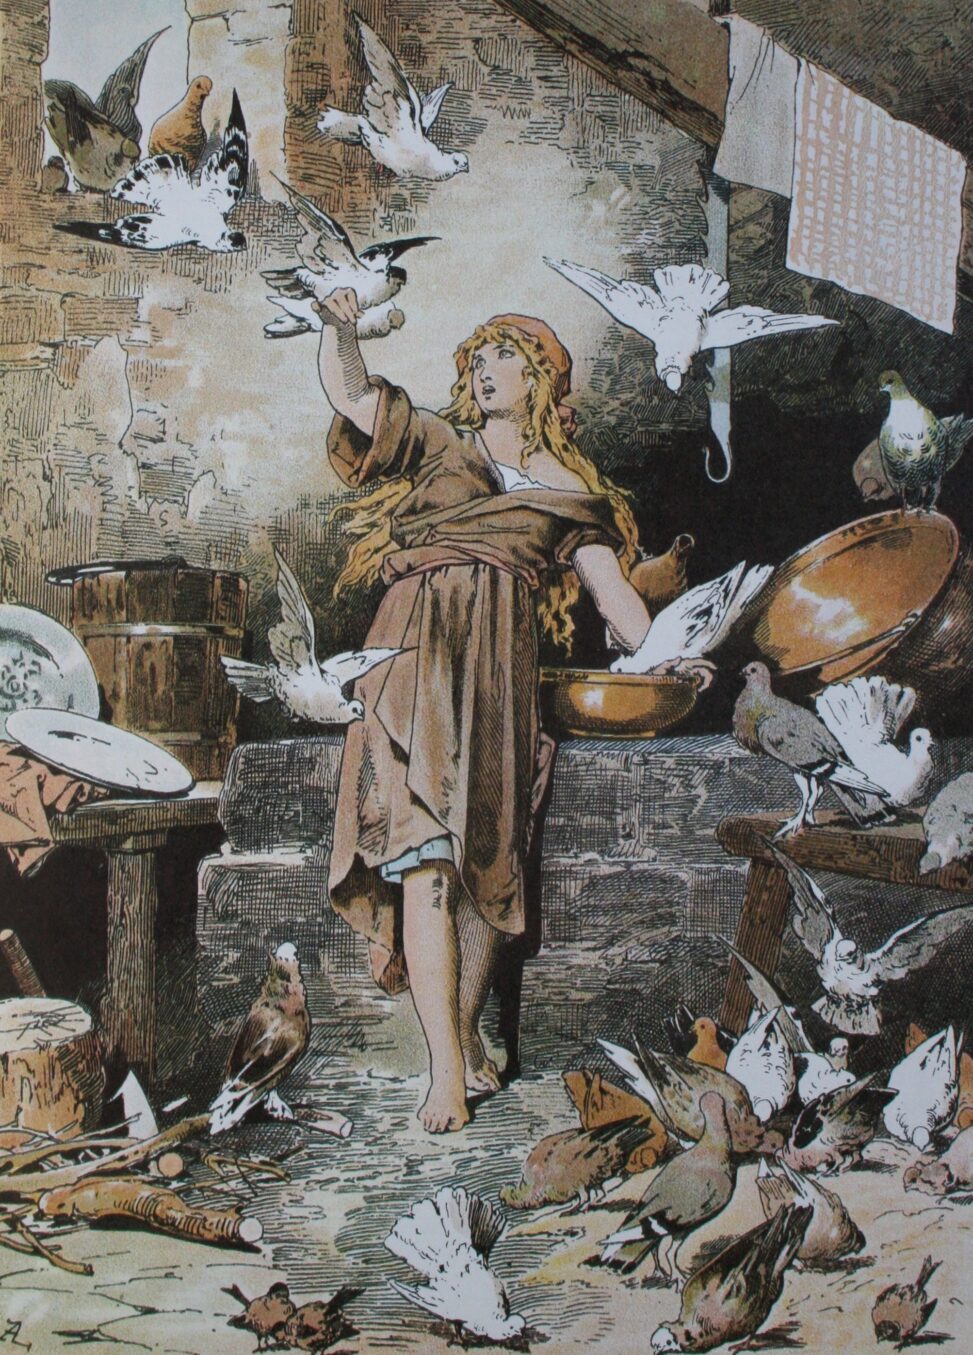 Cinderella surrounded by the doves that punished her stepsisters